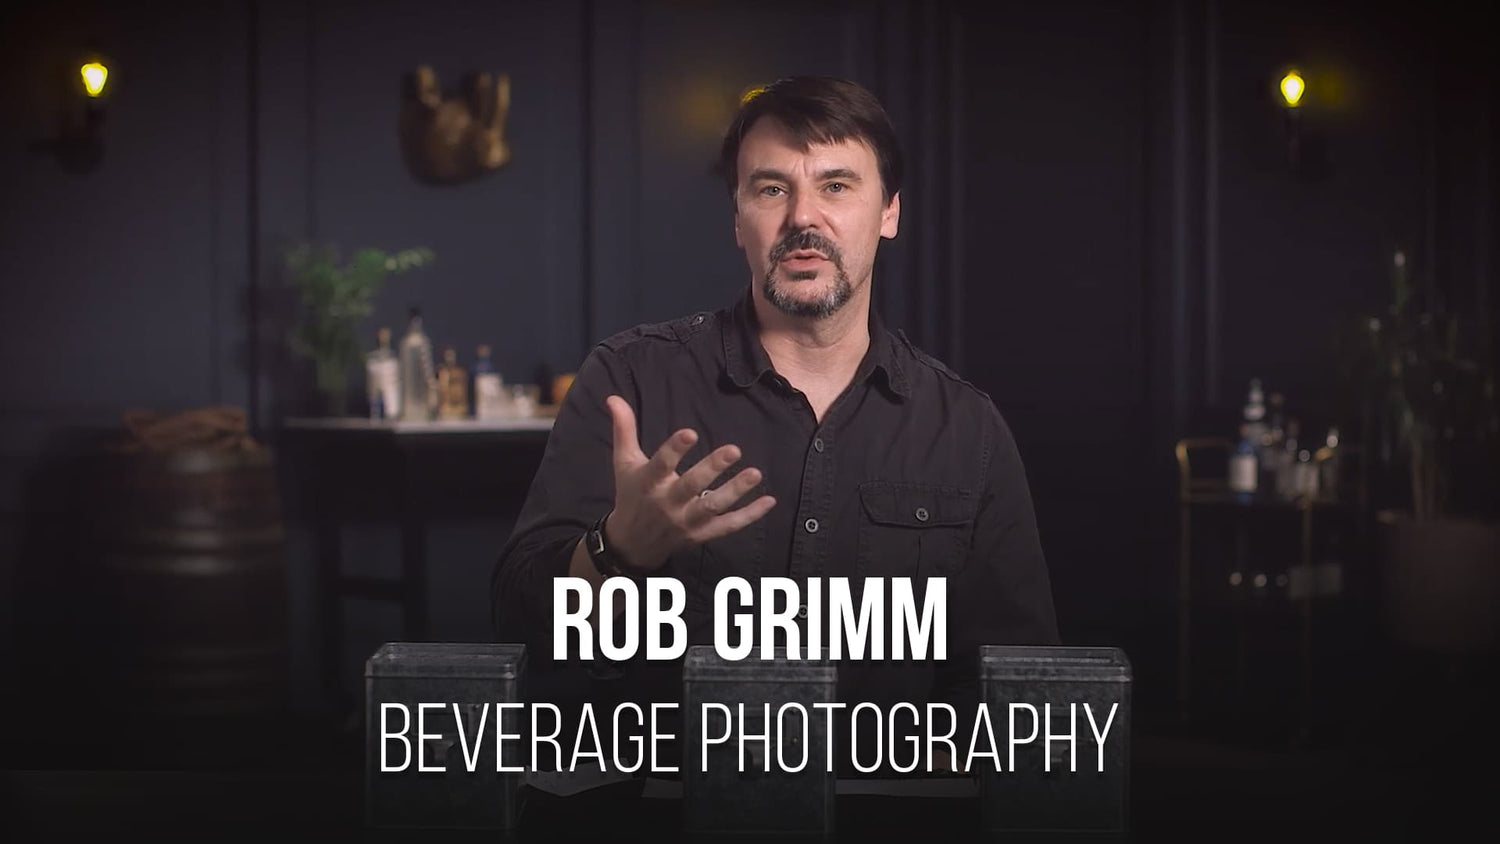 Rob Grimm teaches beverage photography in a masterclass tutorial with PRO EDU